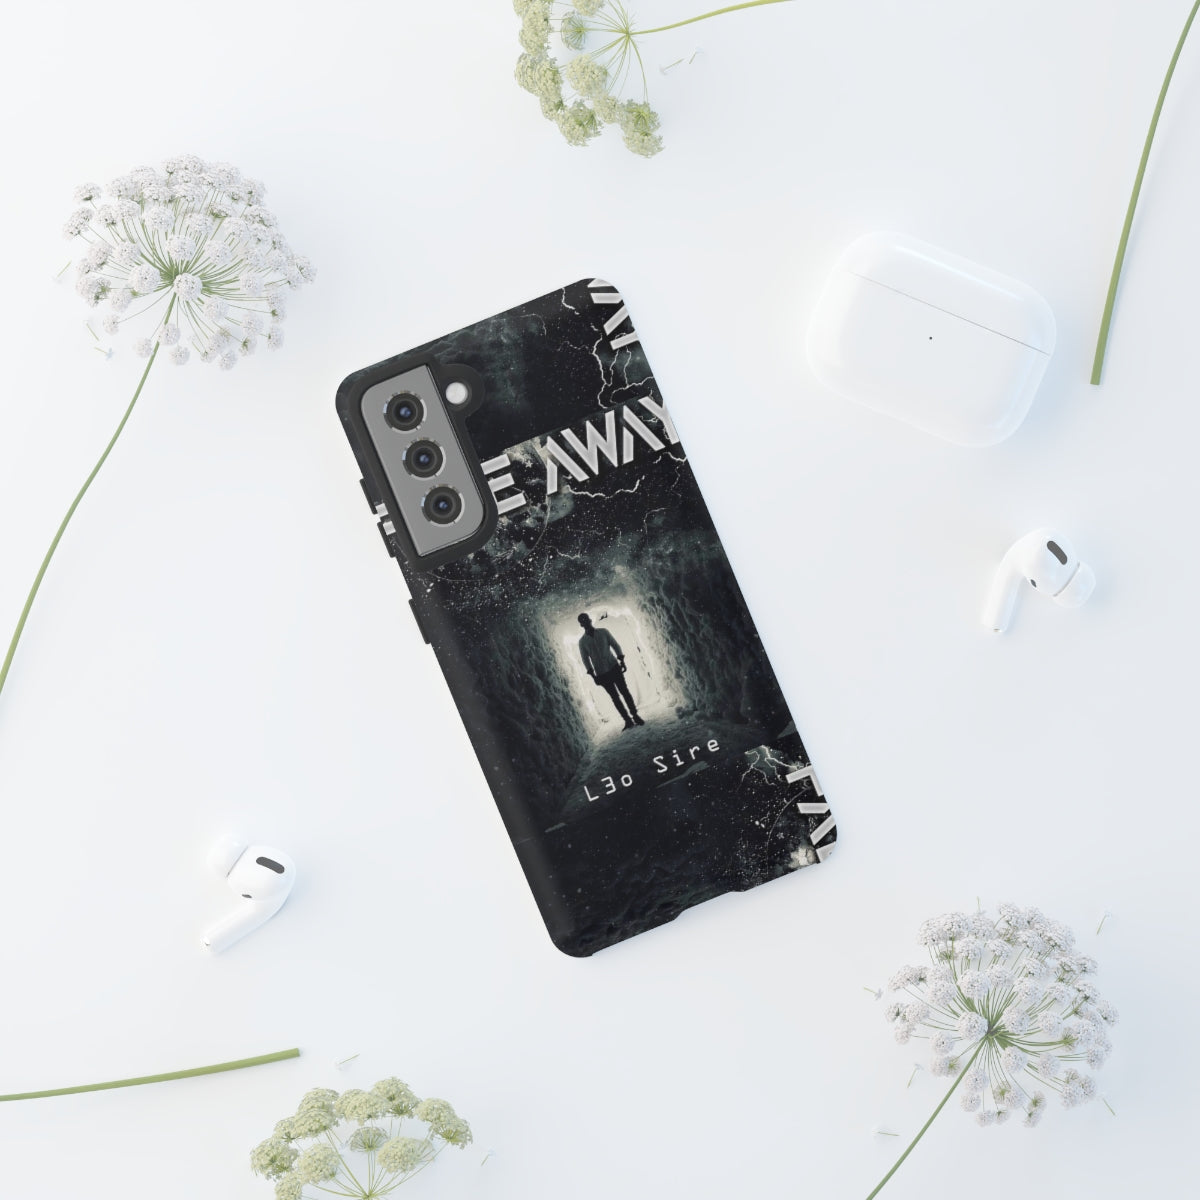 Fade Away Phone Cases